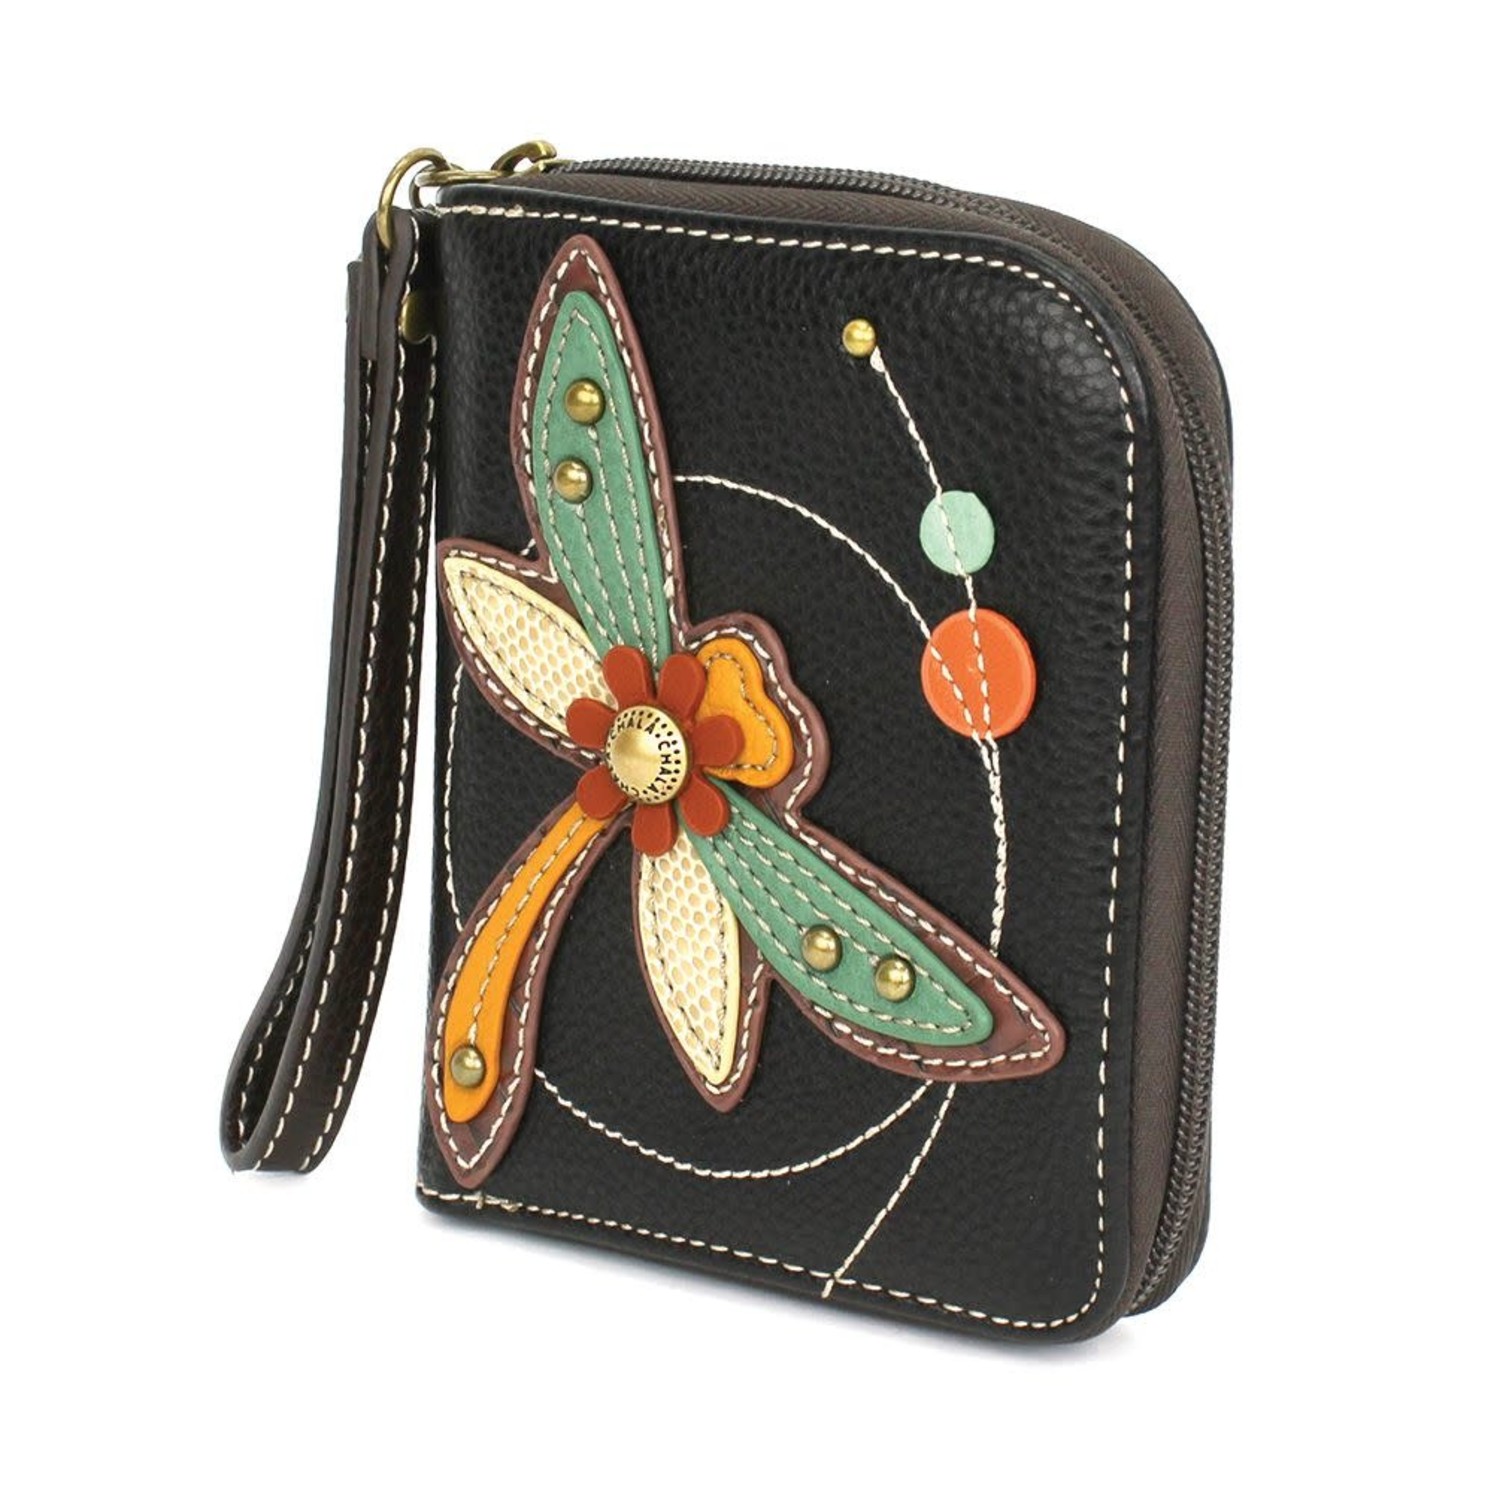 DRAGONFLY Handbag Collection by Chala in 2023